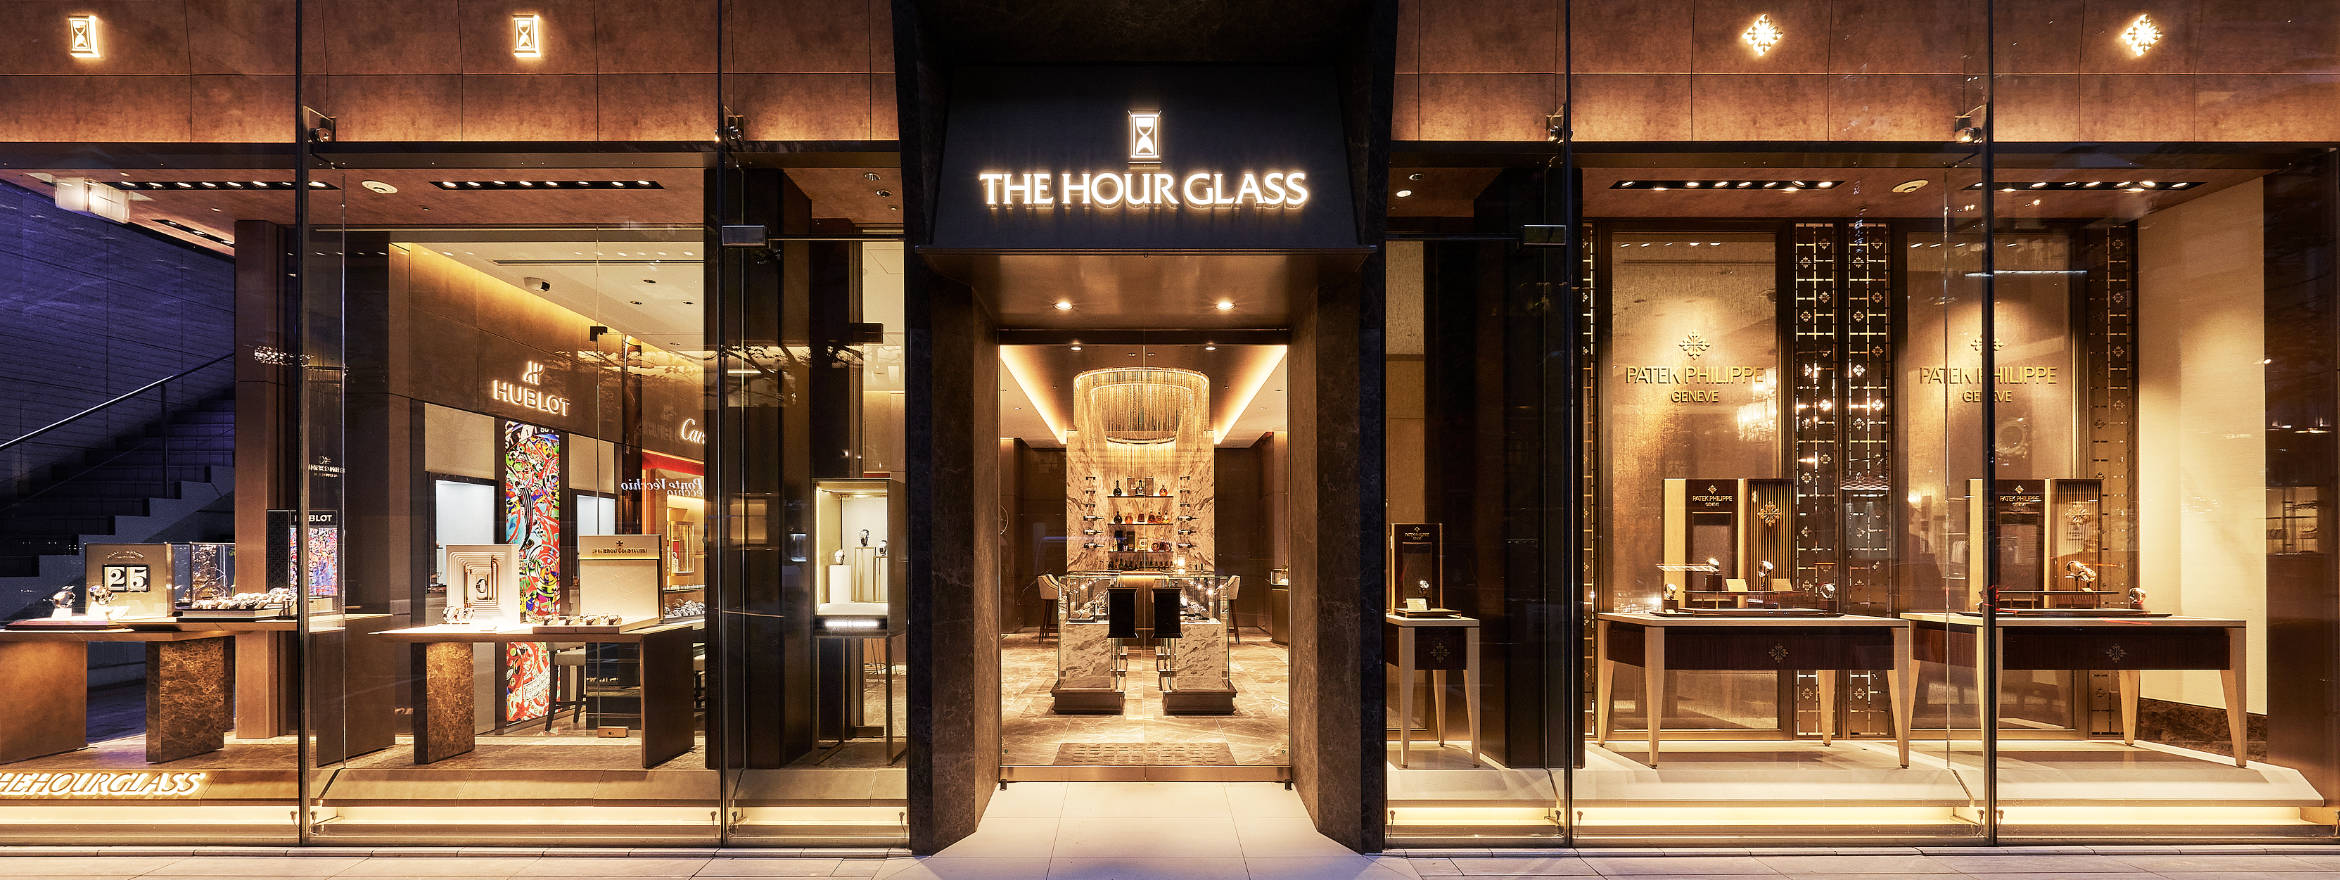 The Hour Glass Japan Celebrates 25 Years With A Newly Refurbished Boutique in Ginza, Tokyo